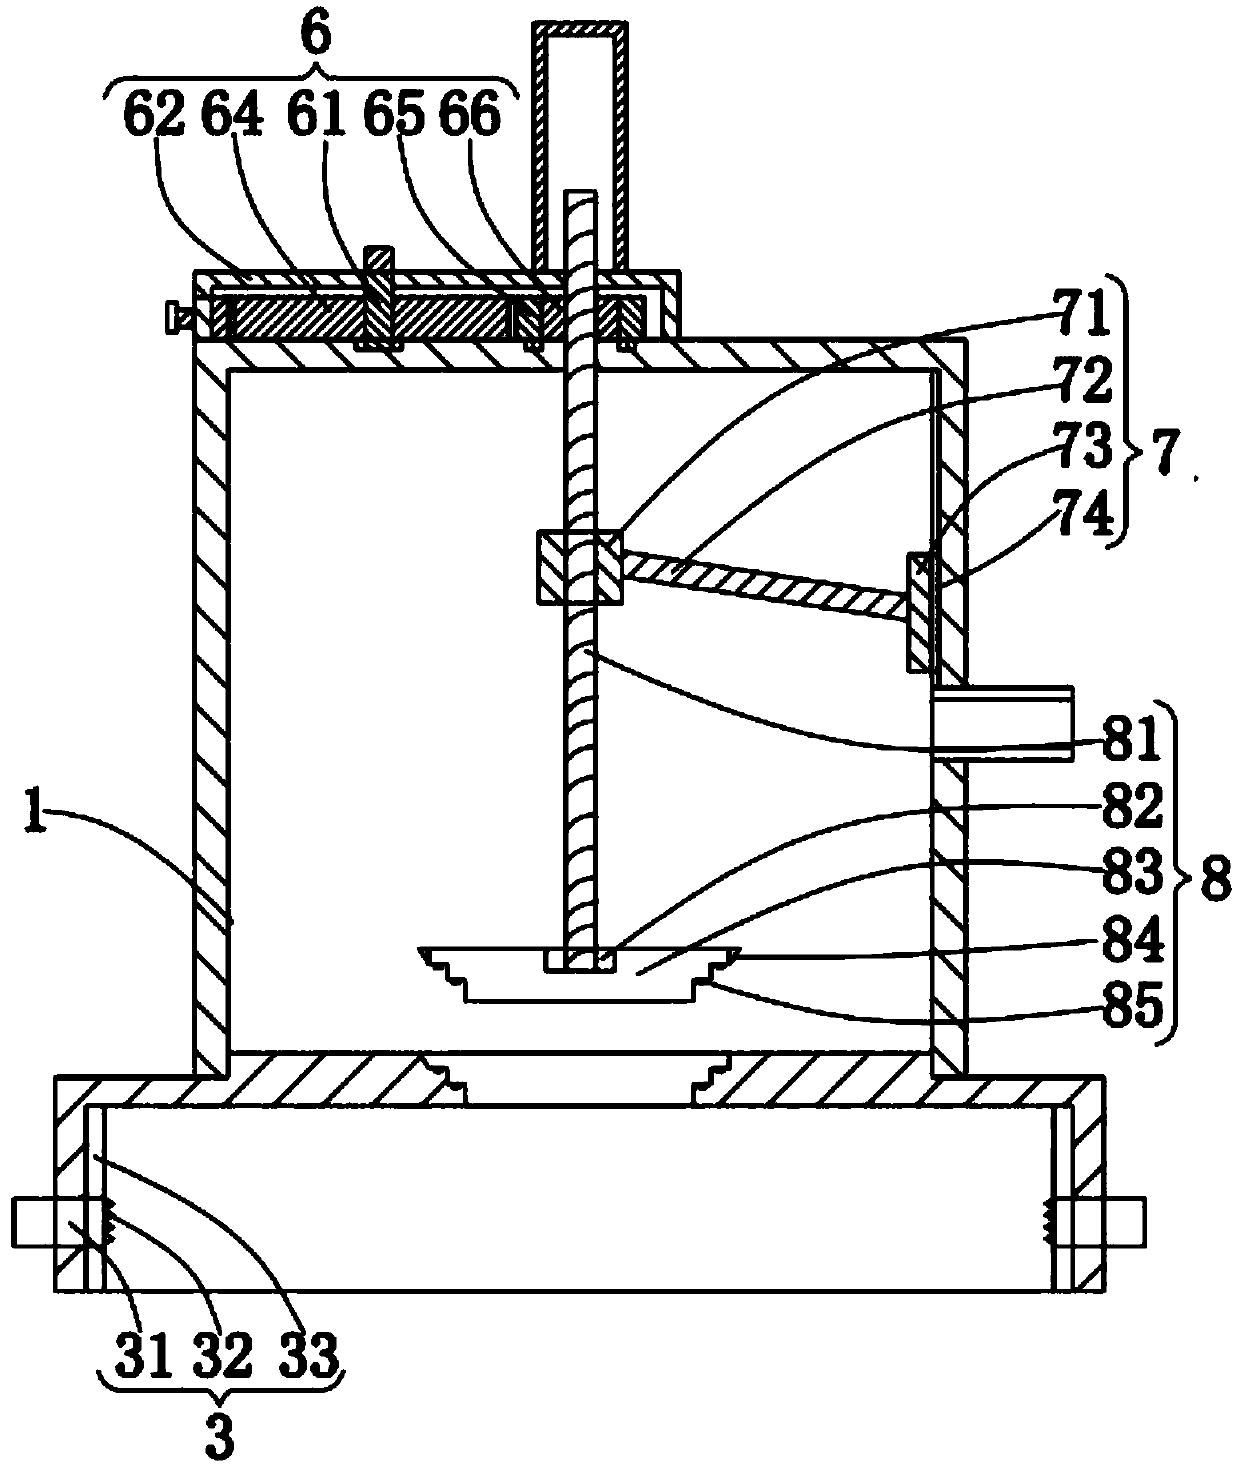 Wellhead device for geothermal energy